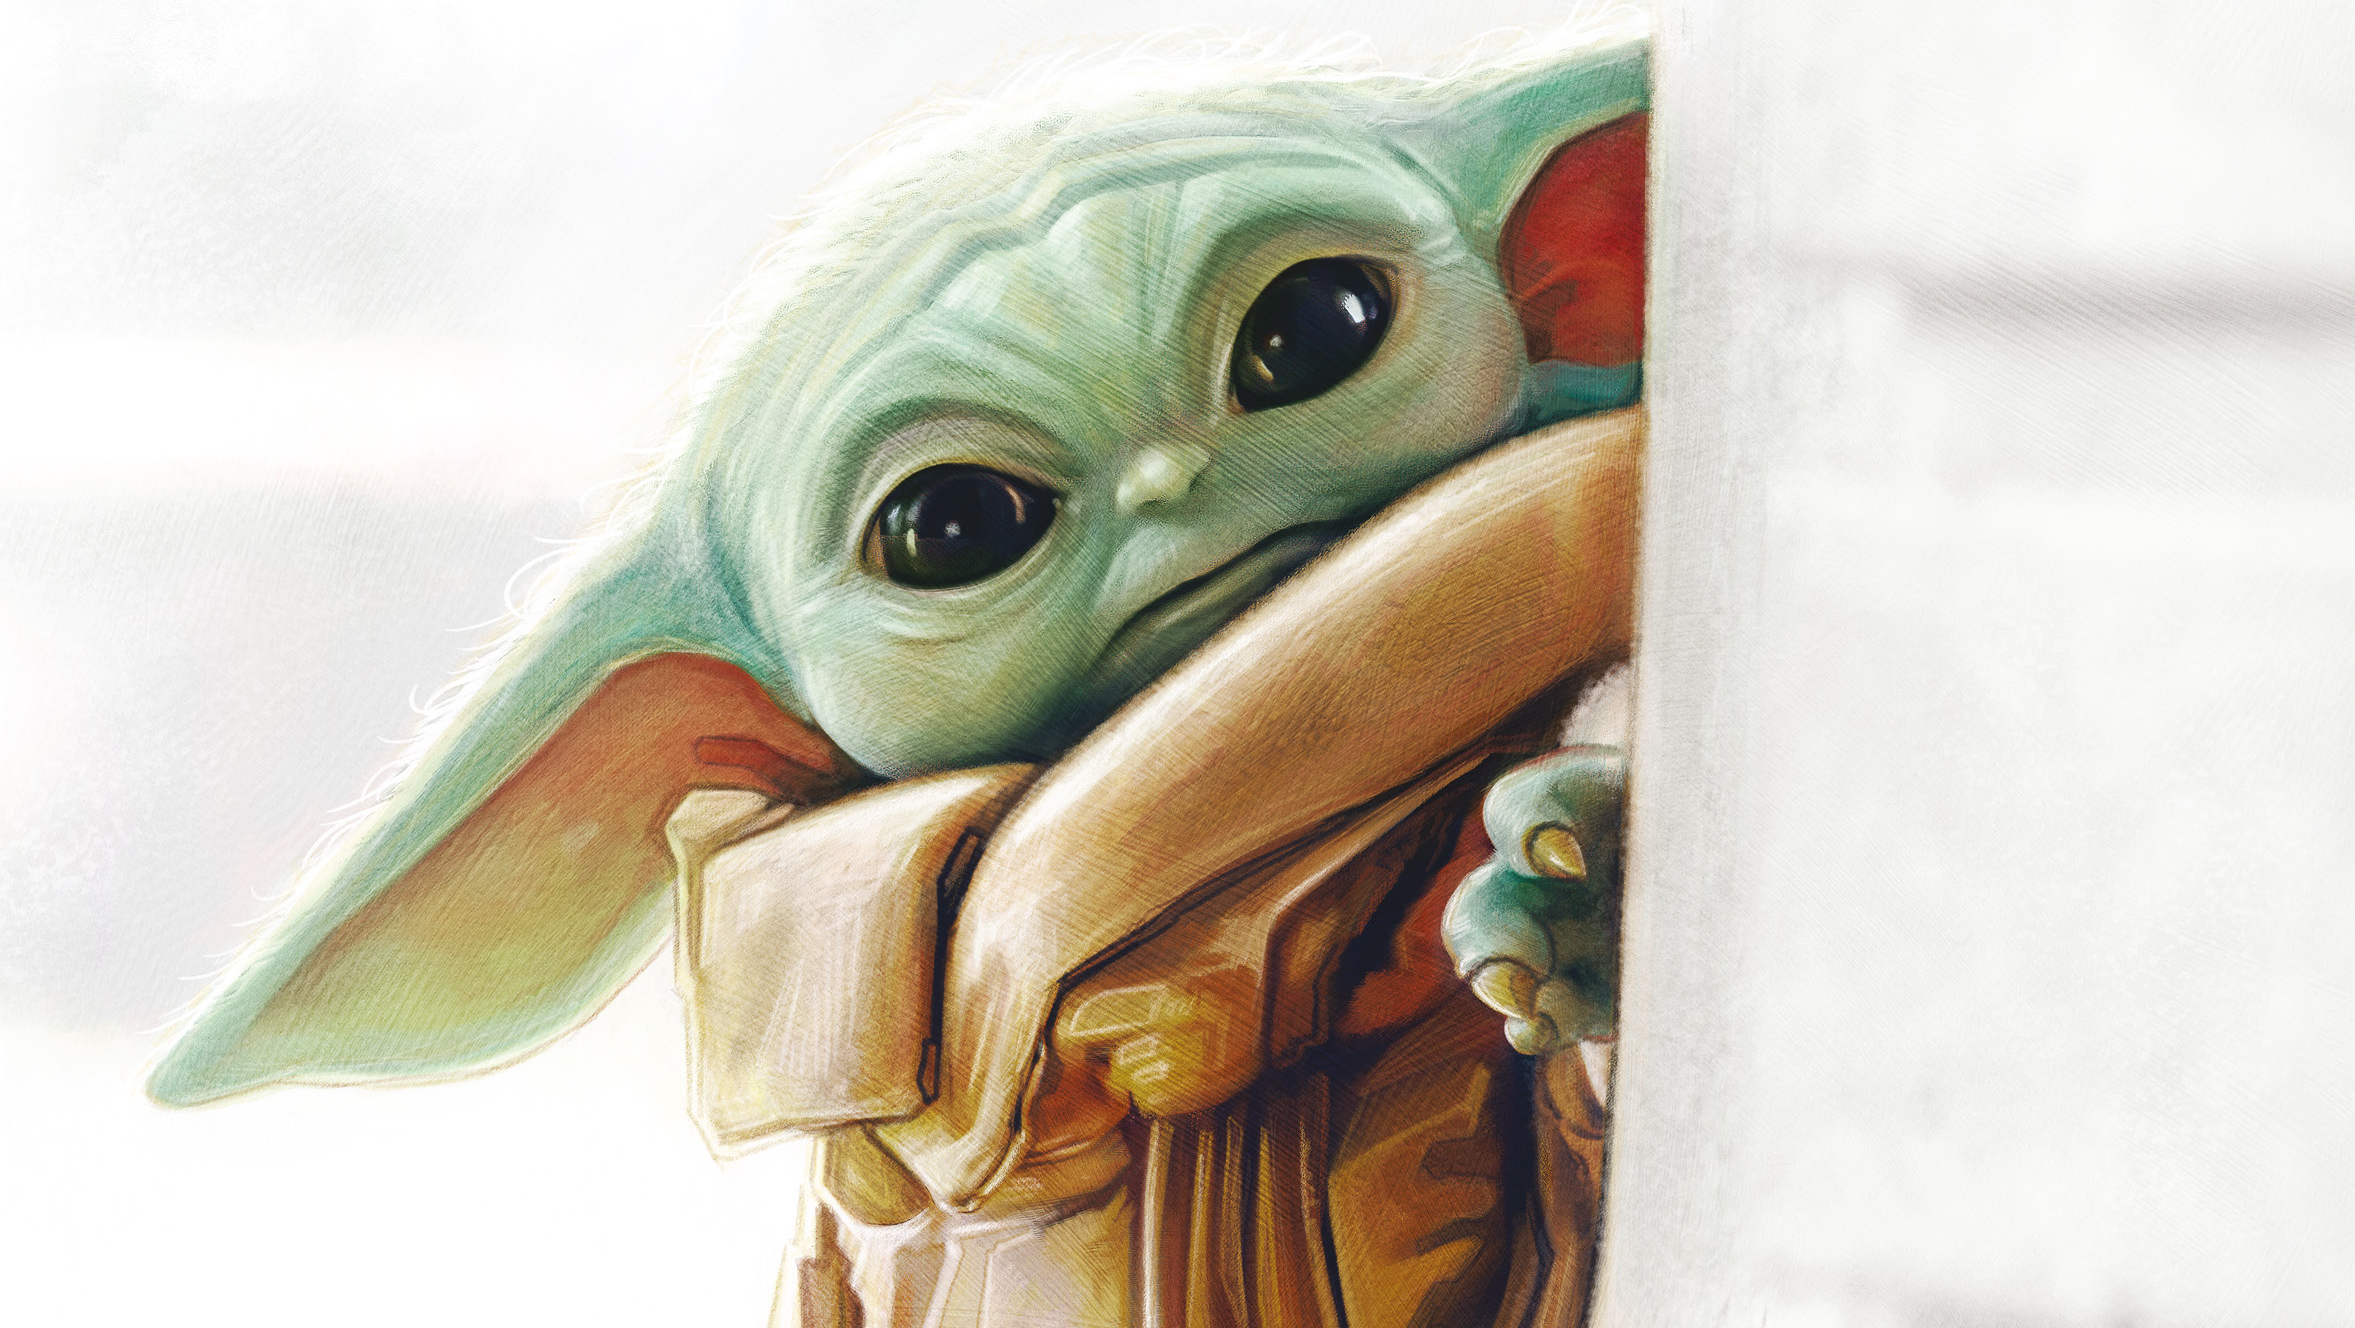 Grogu on the Star Wars Insider cover